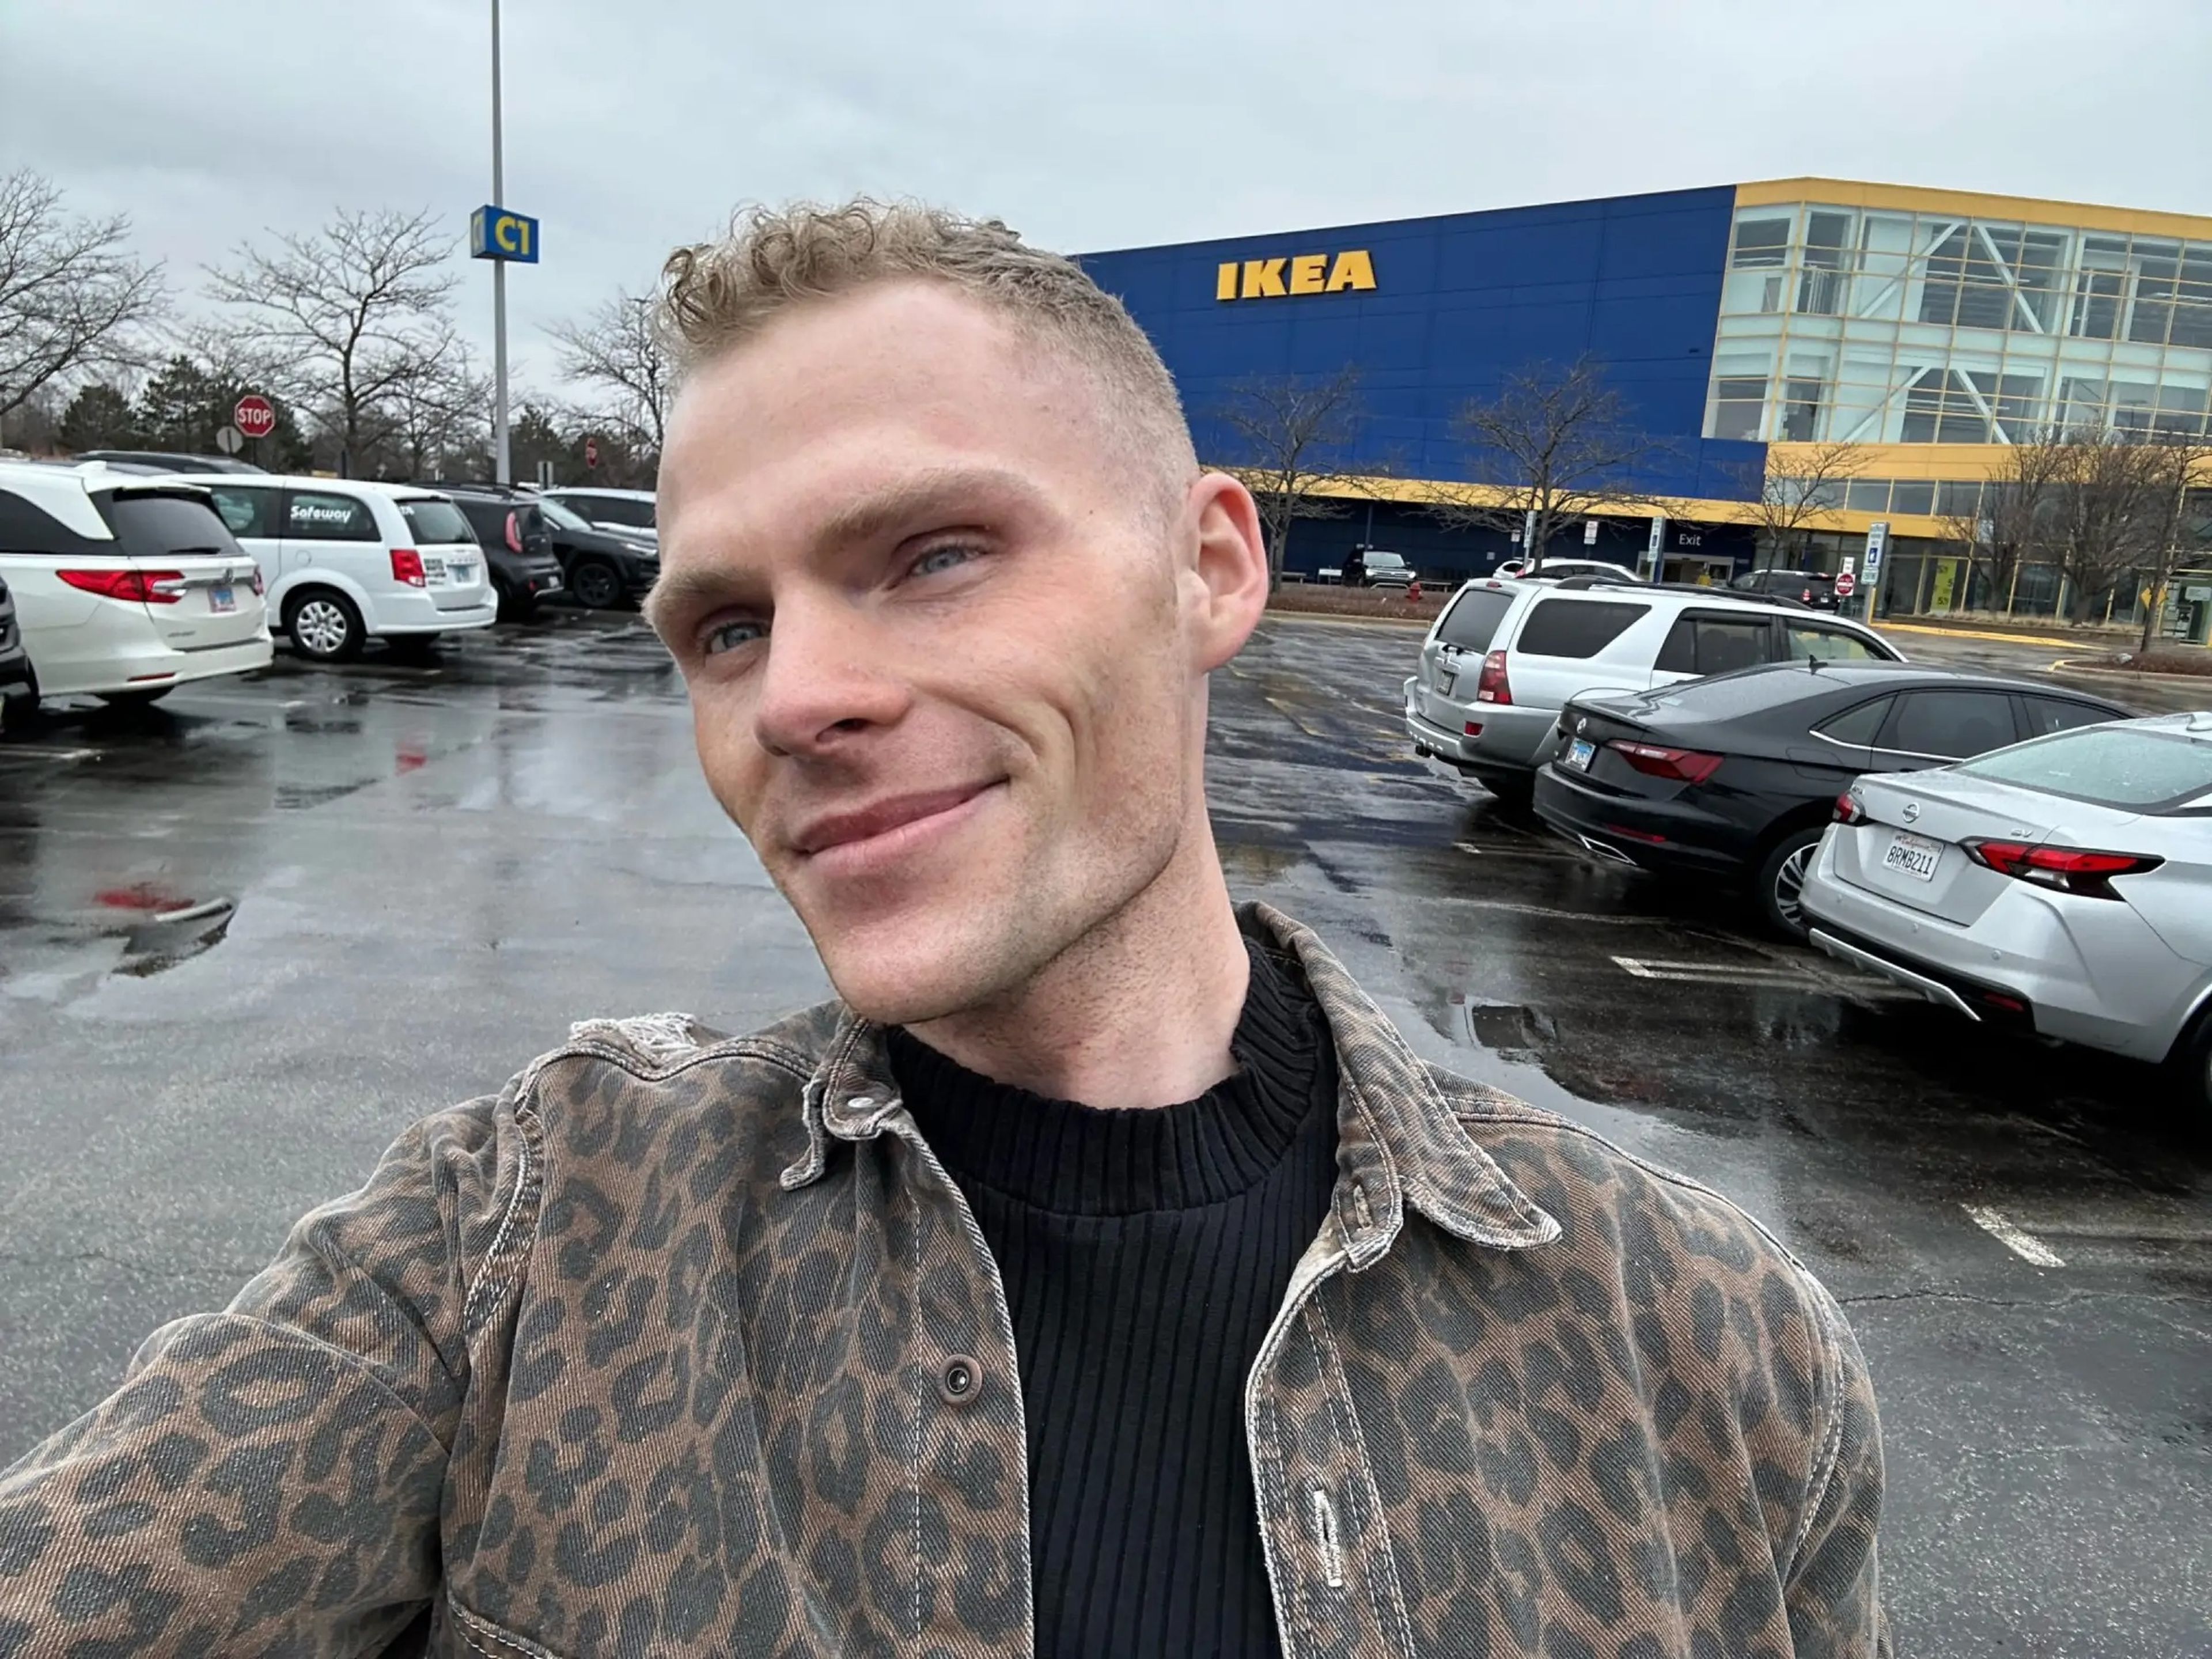 Selfie of the writer in front of Ikea